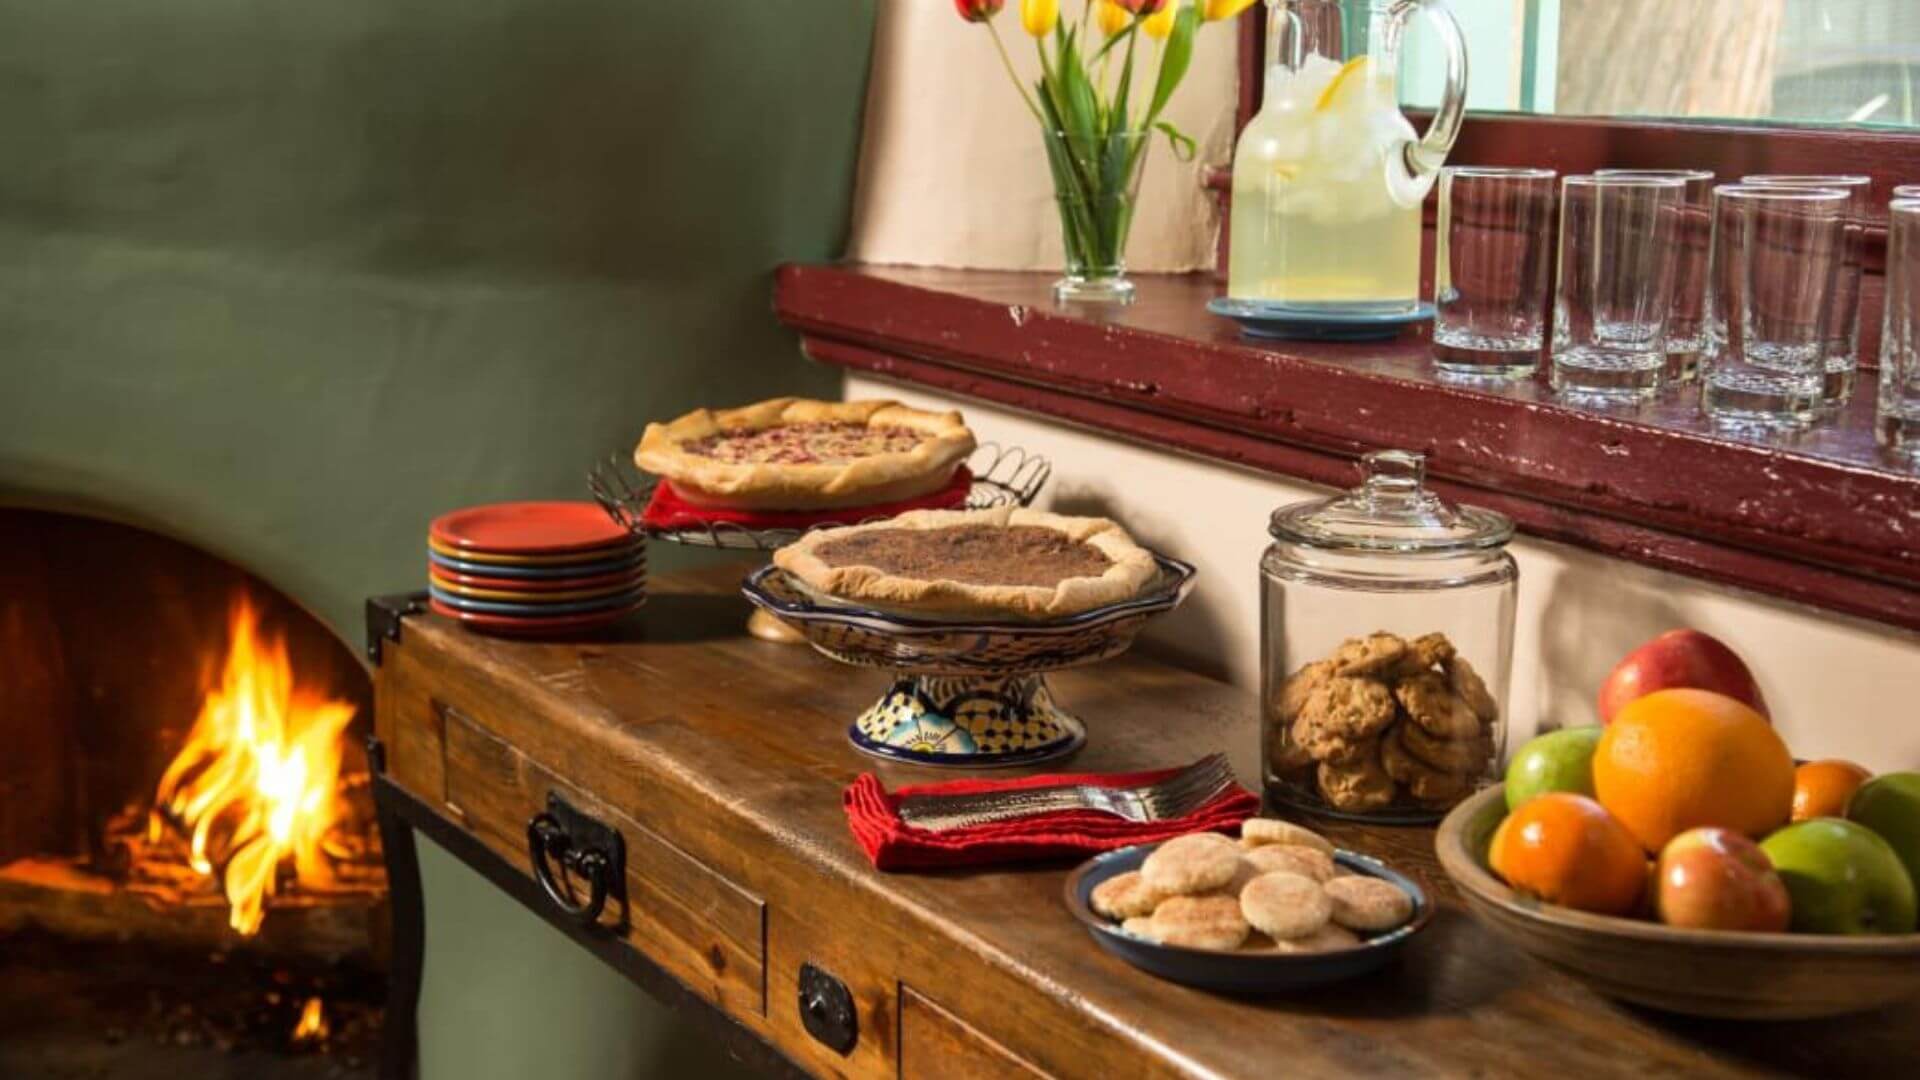 Afternoon treats and pies displayed on sideboard